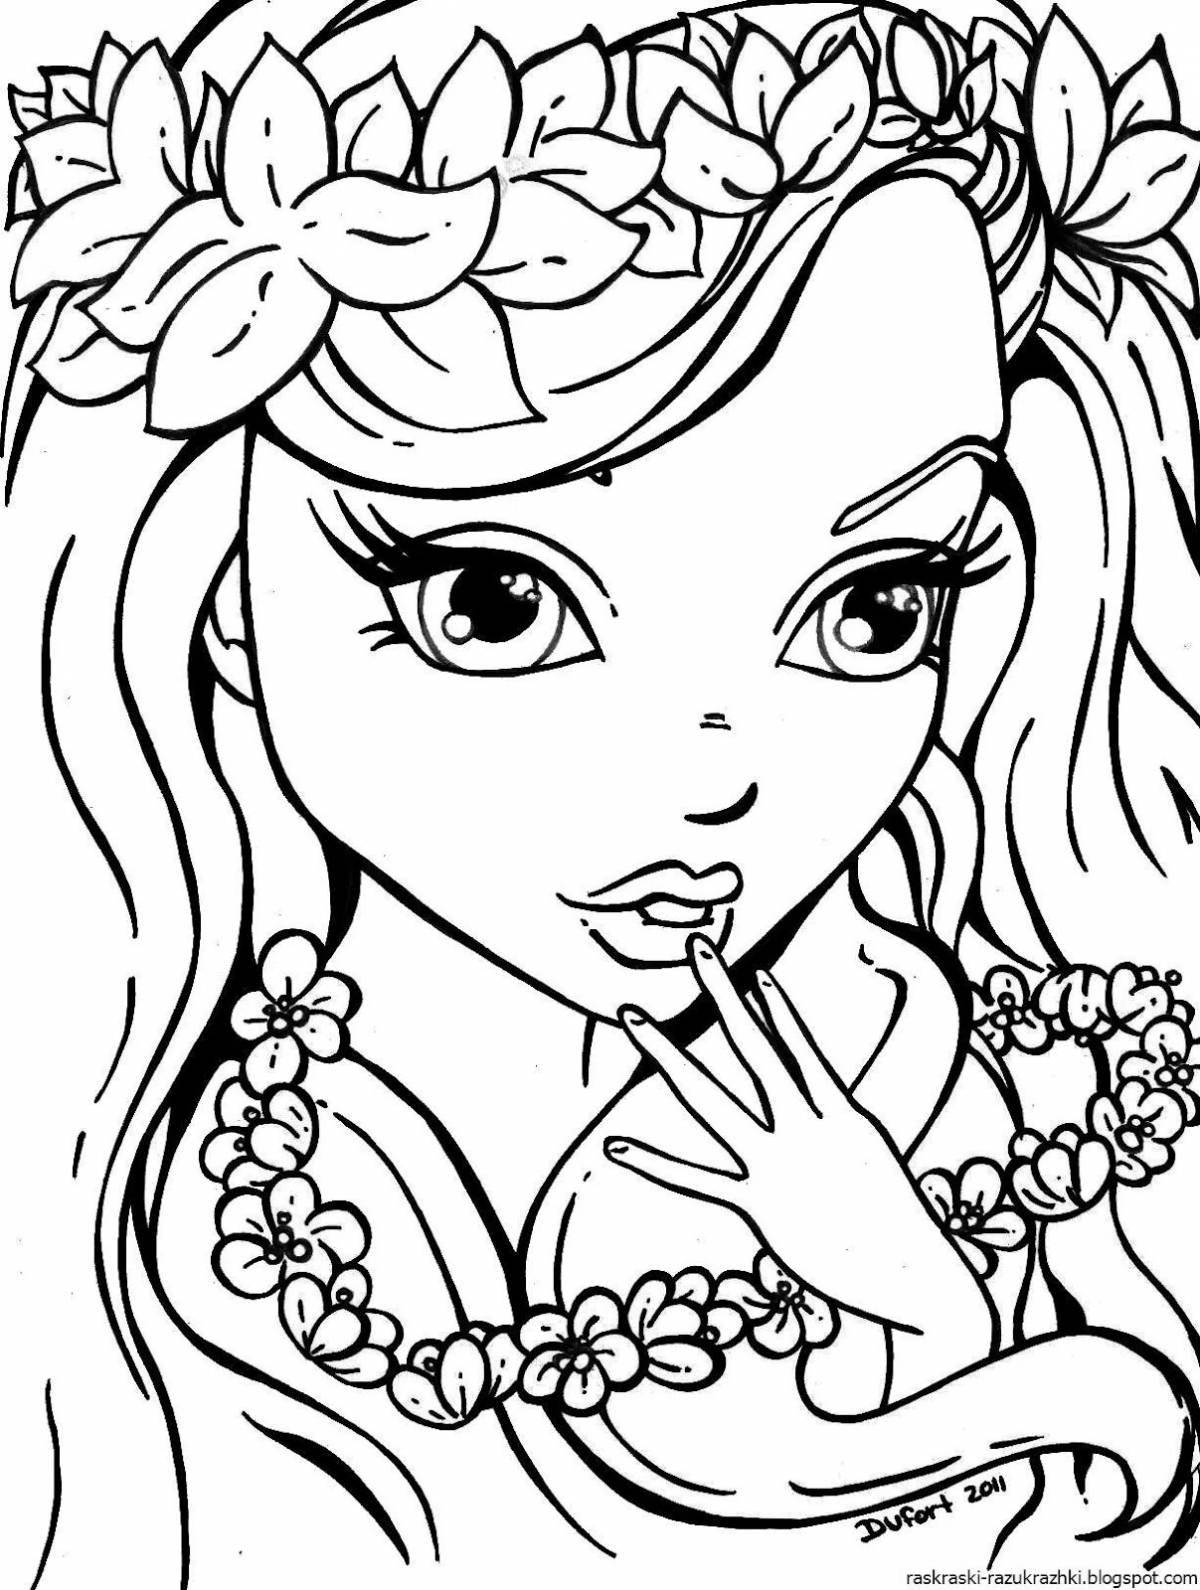 Exquisite coloring book for girls 9